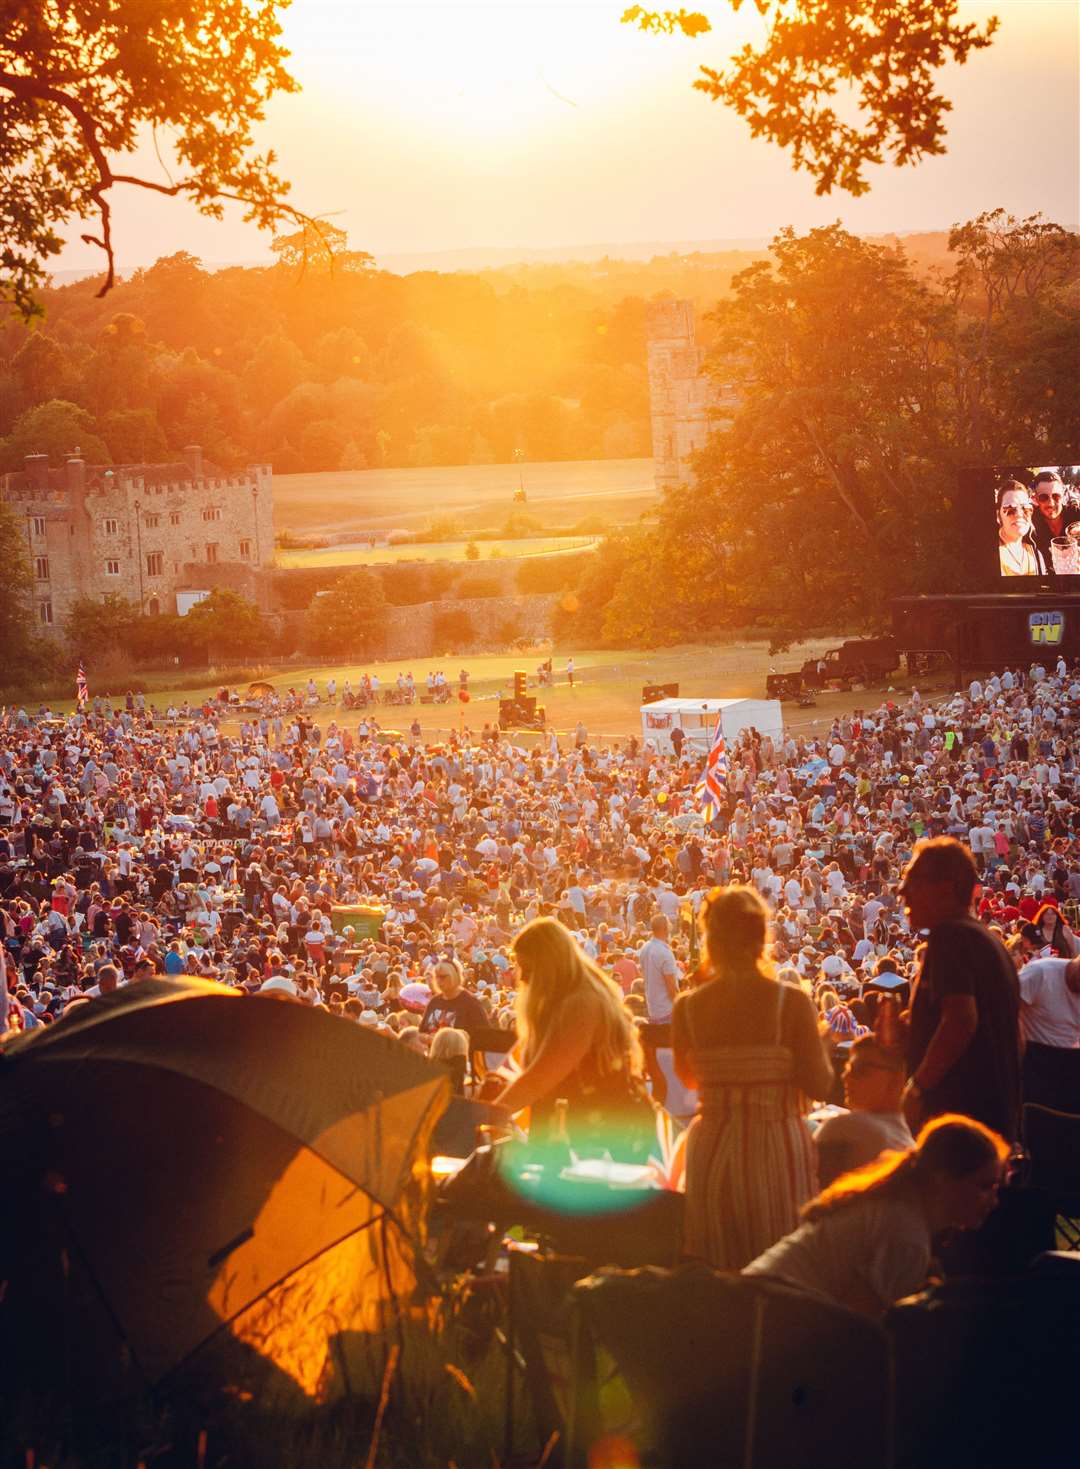 Leeds Castle Classical Concert marks 900 years of the castle this year